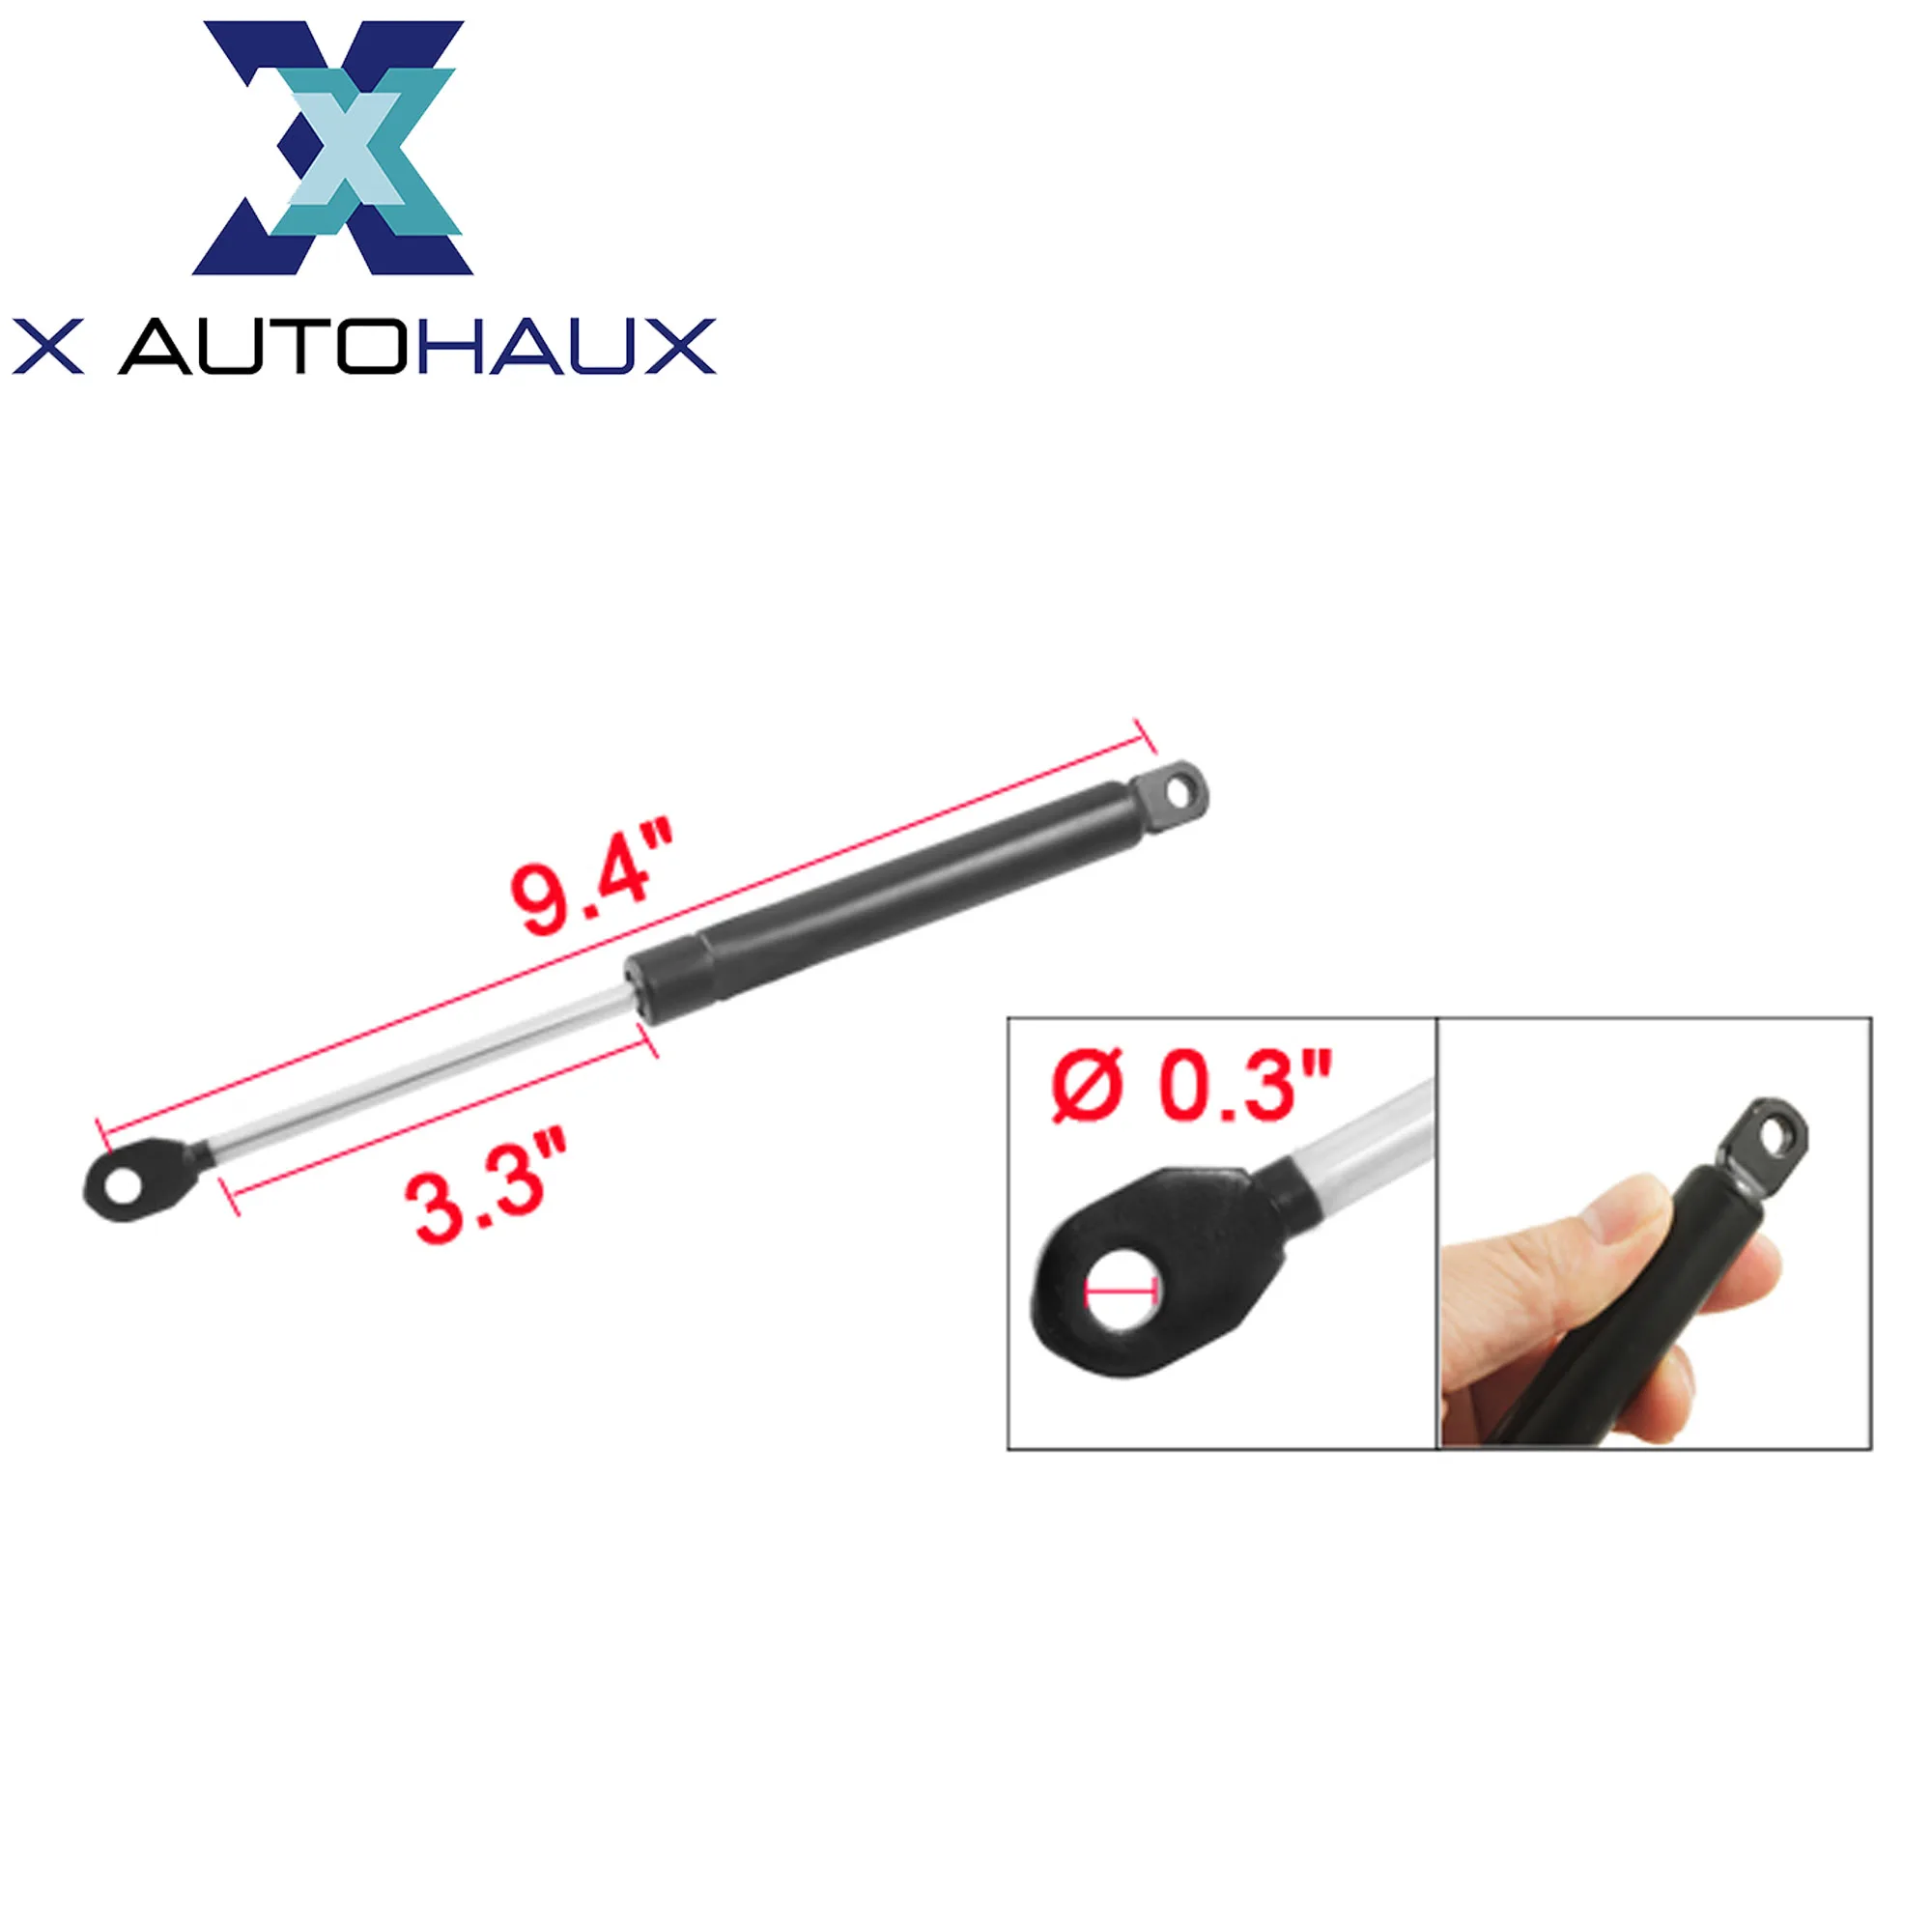 

X Autohaux Auto 9.4inch Gas Struts Bars Shock 30kg 33lb Force Lift Arm Rod Damper Support Gas Spring Absorber Car Accessories